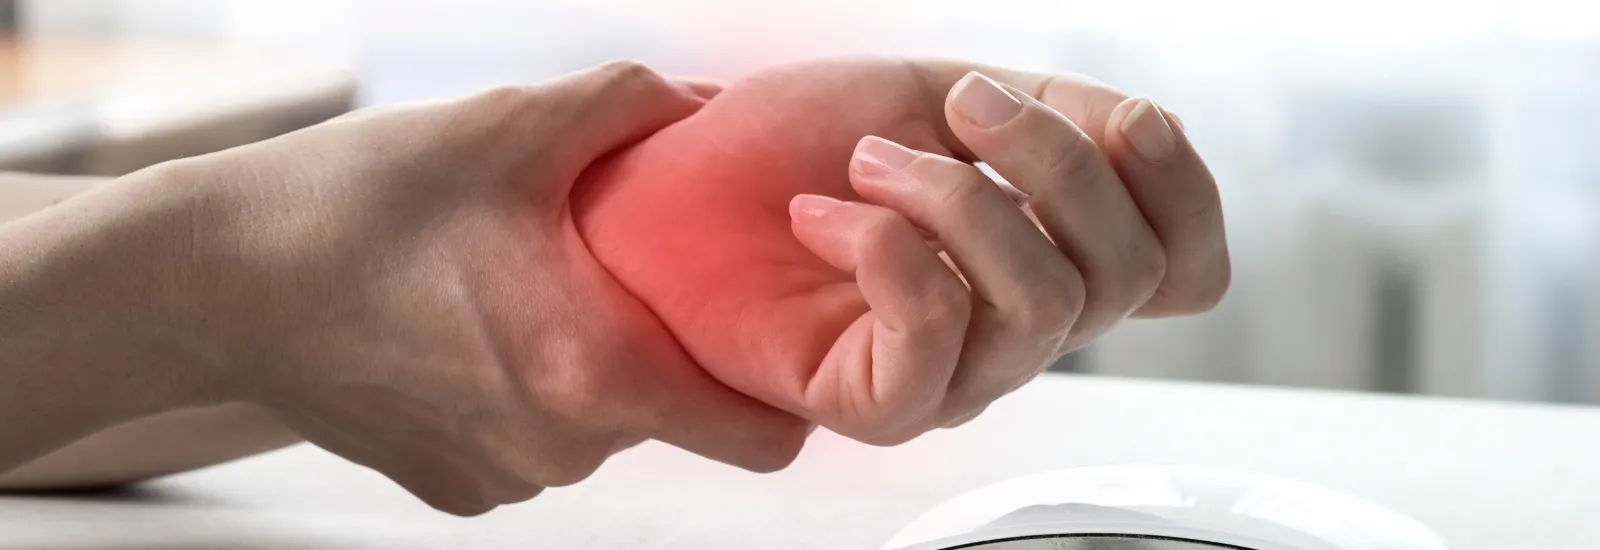 Diagnosing Carpal Tunnel Syndrome